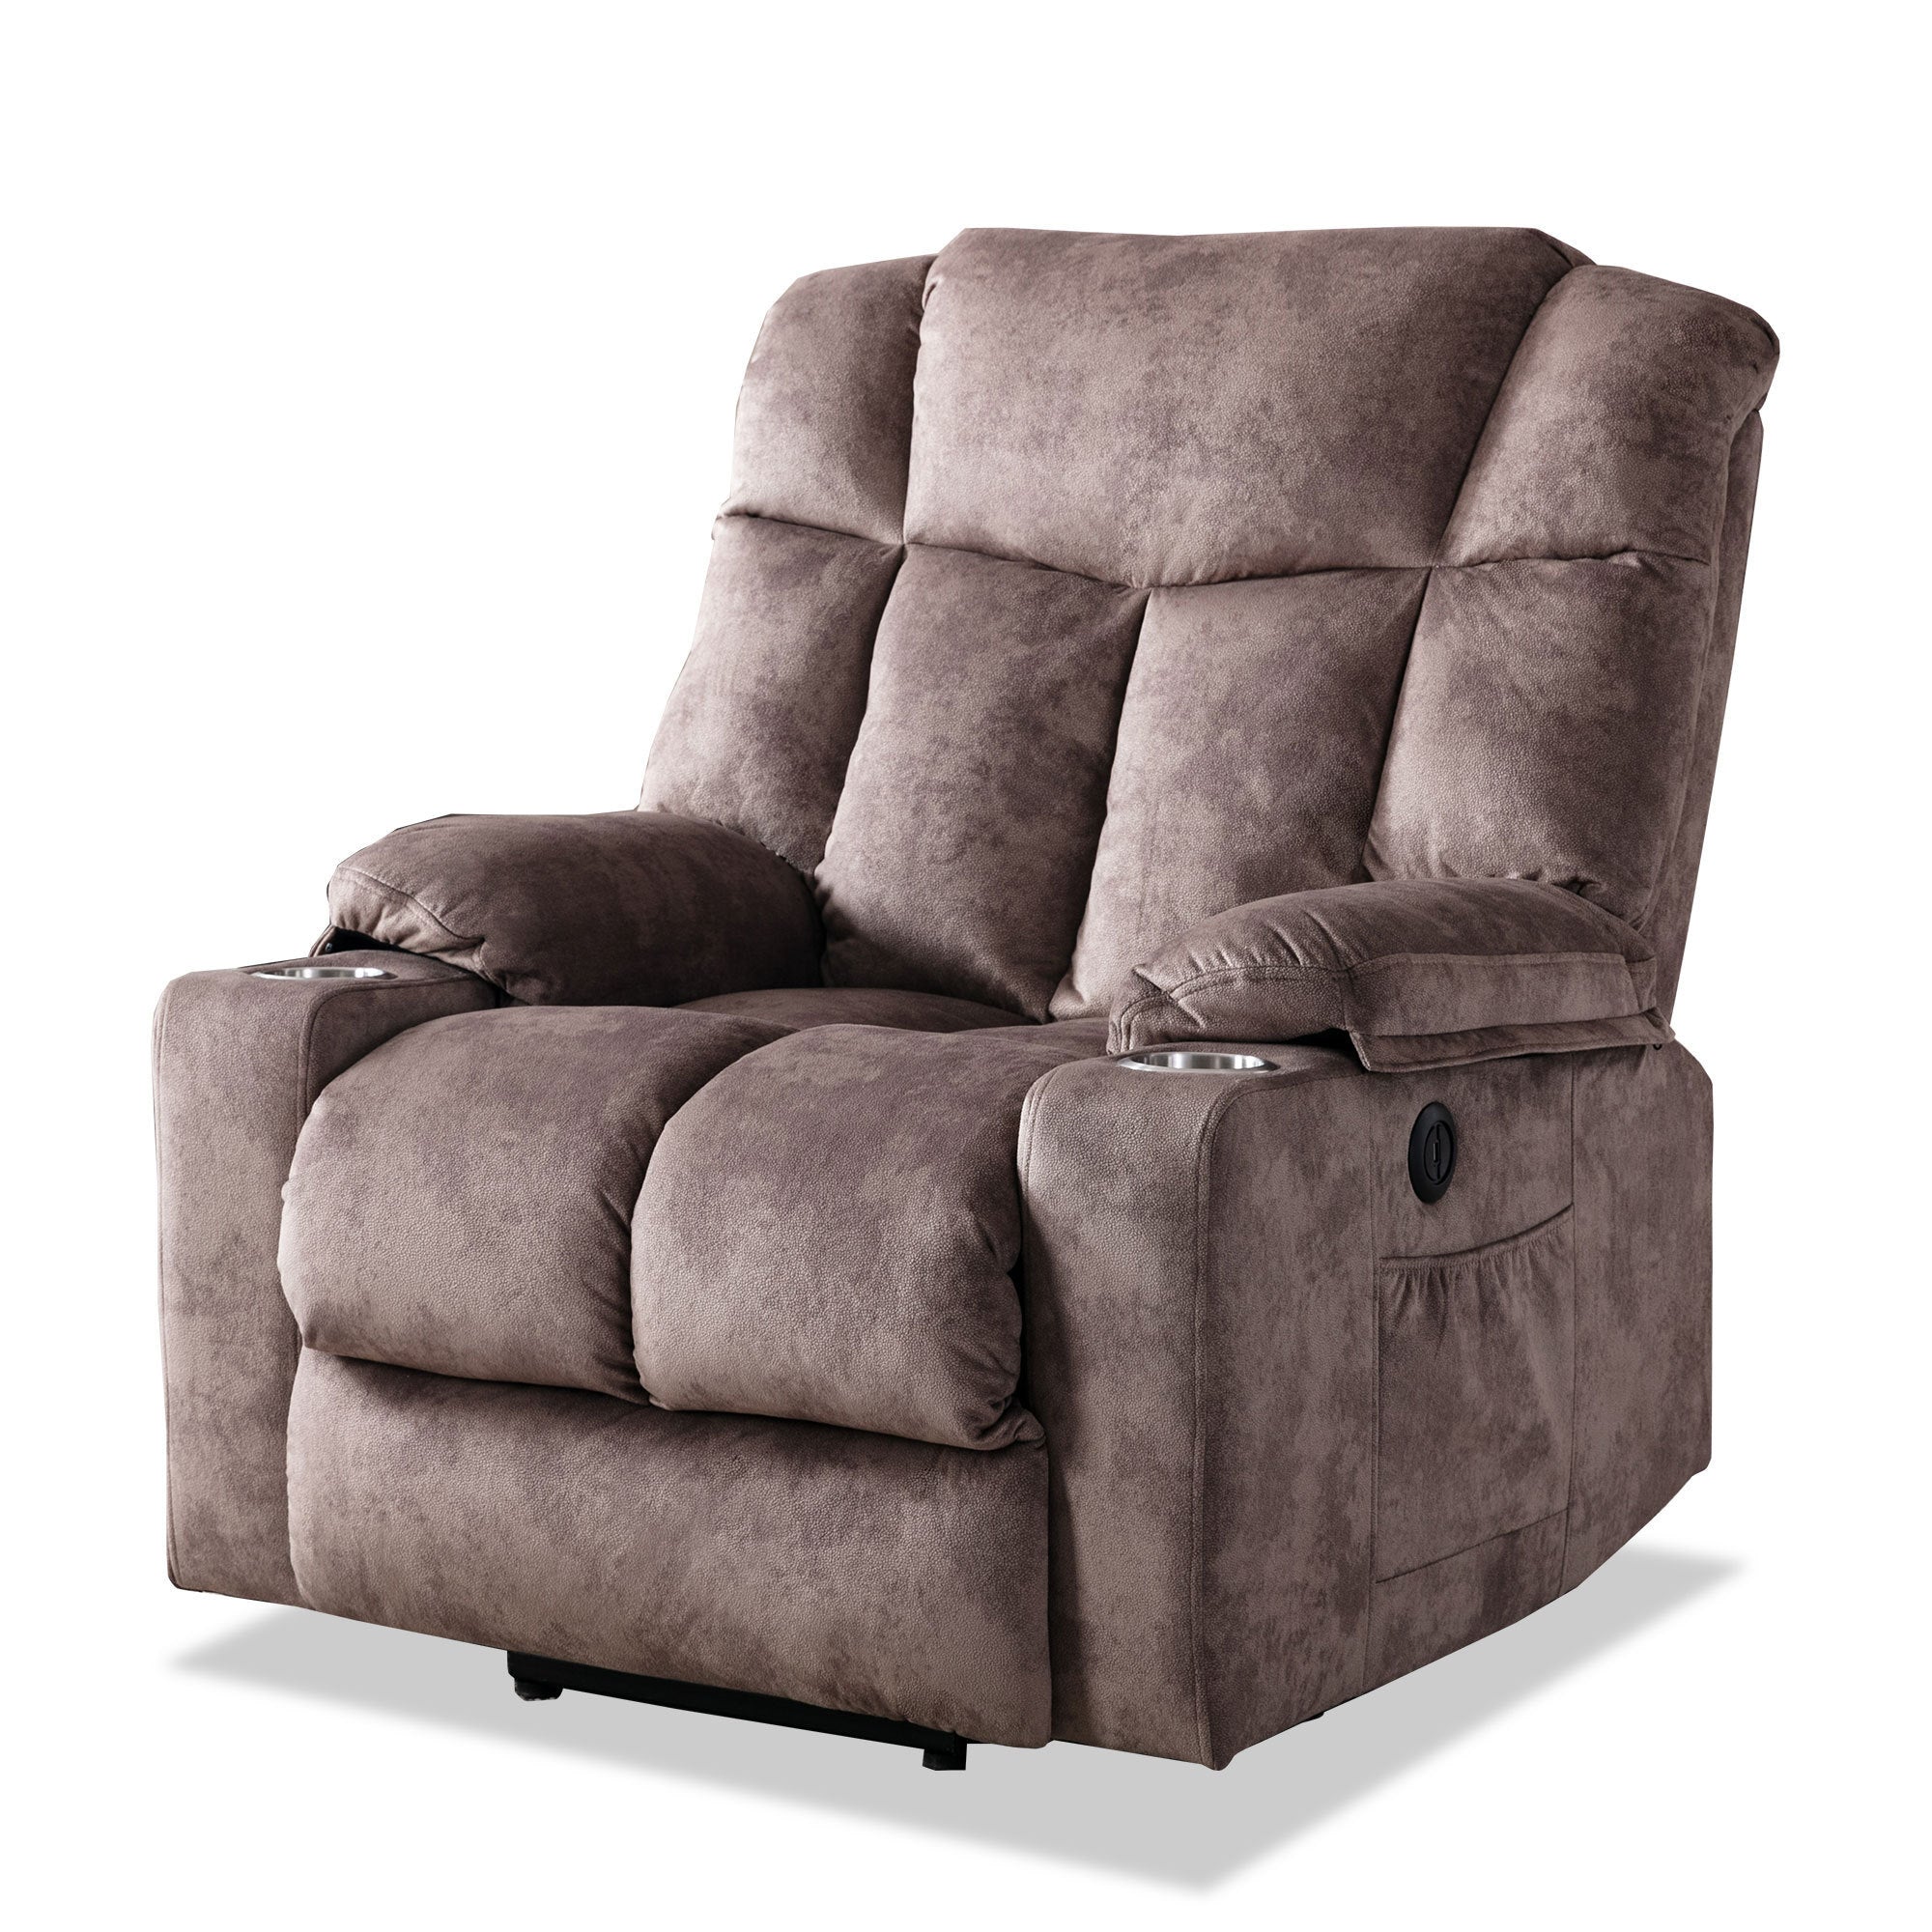 Power Lift Recliner Chair with Washable Cover, angle view seated